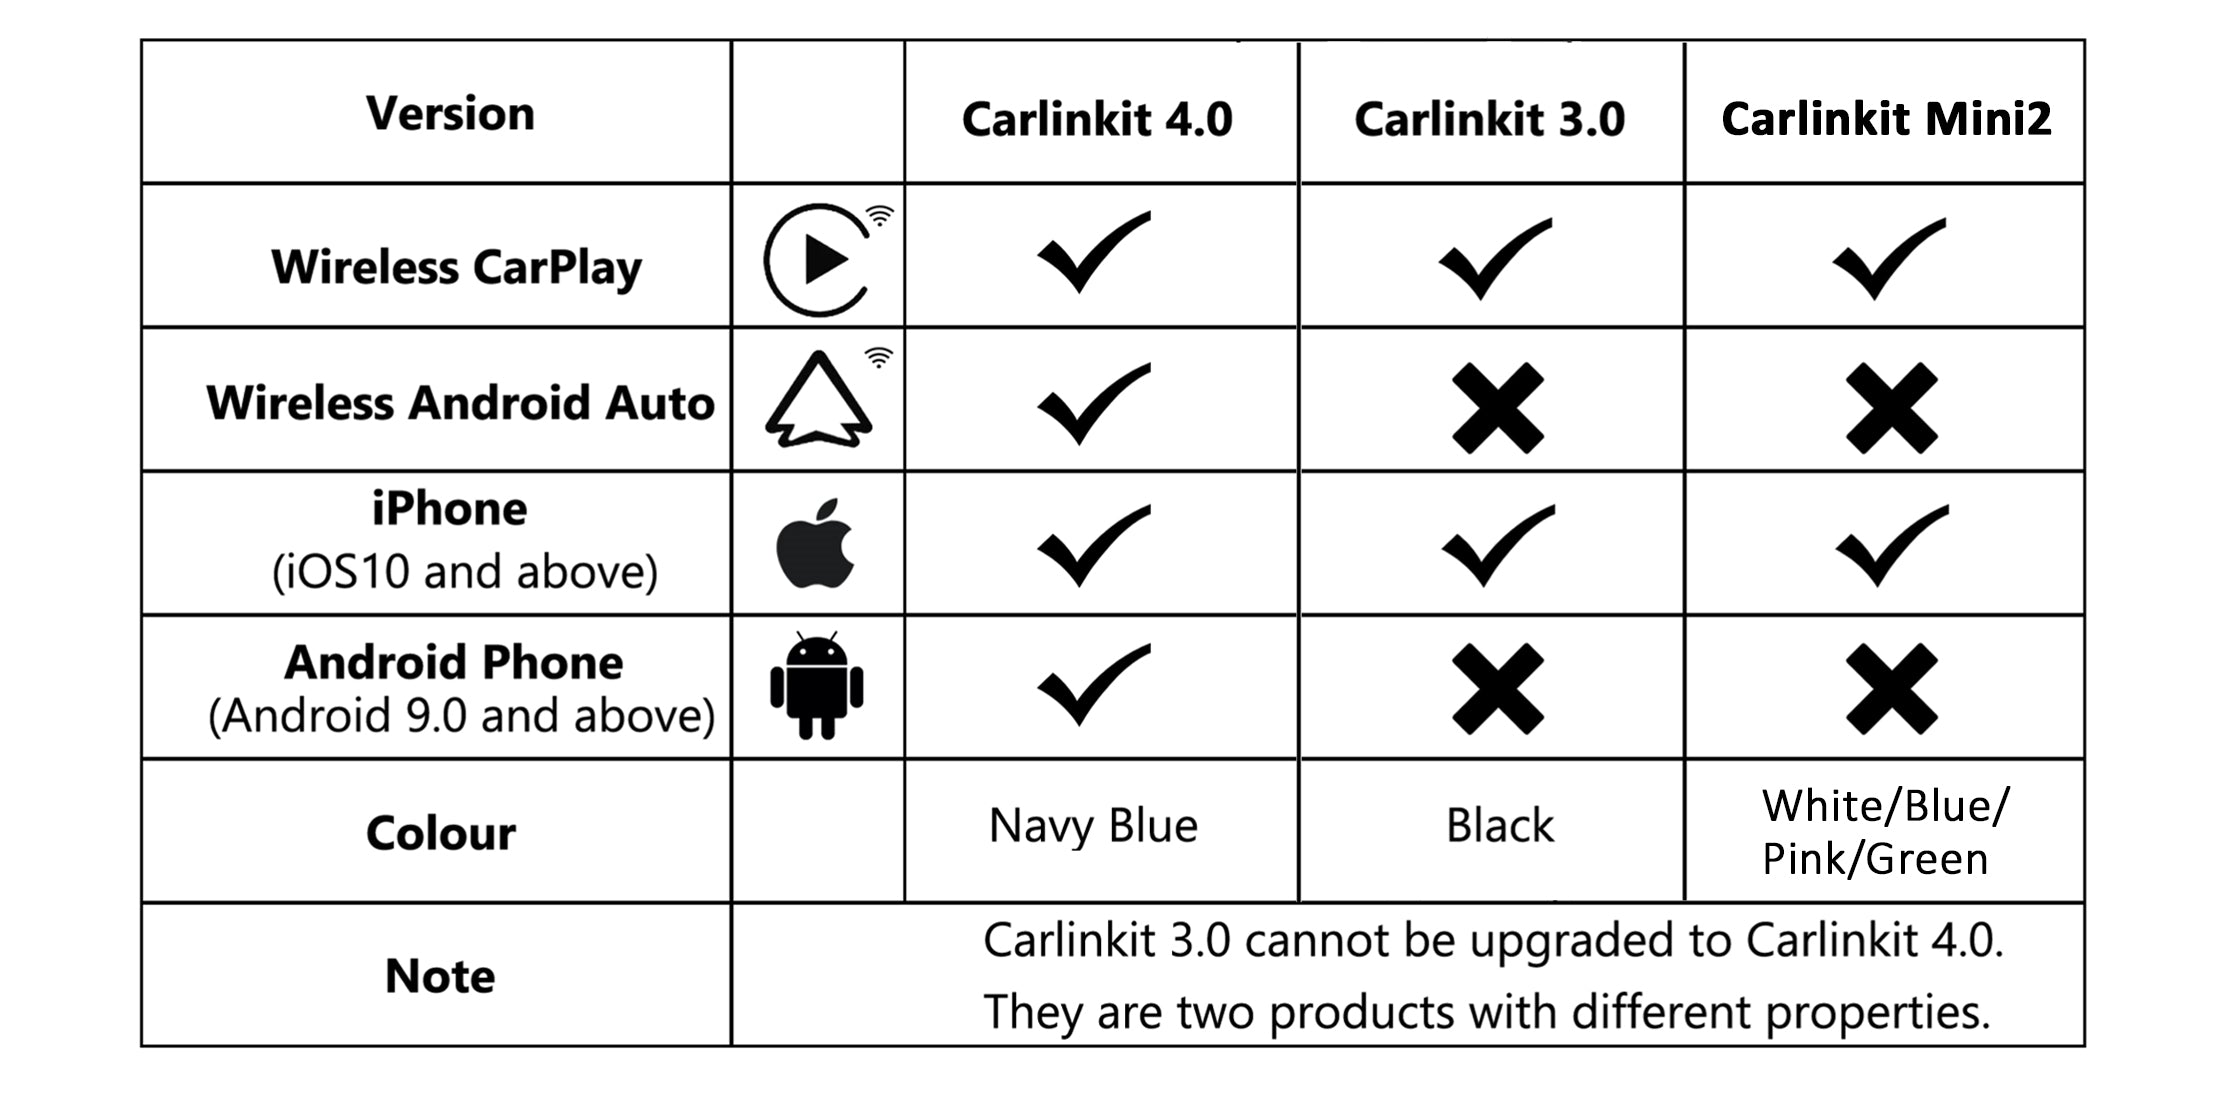 Comparison of features between Carlinkit 3.0, Carlinkit 4.0, and Carlinkit Mini2